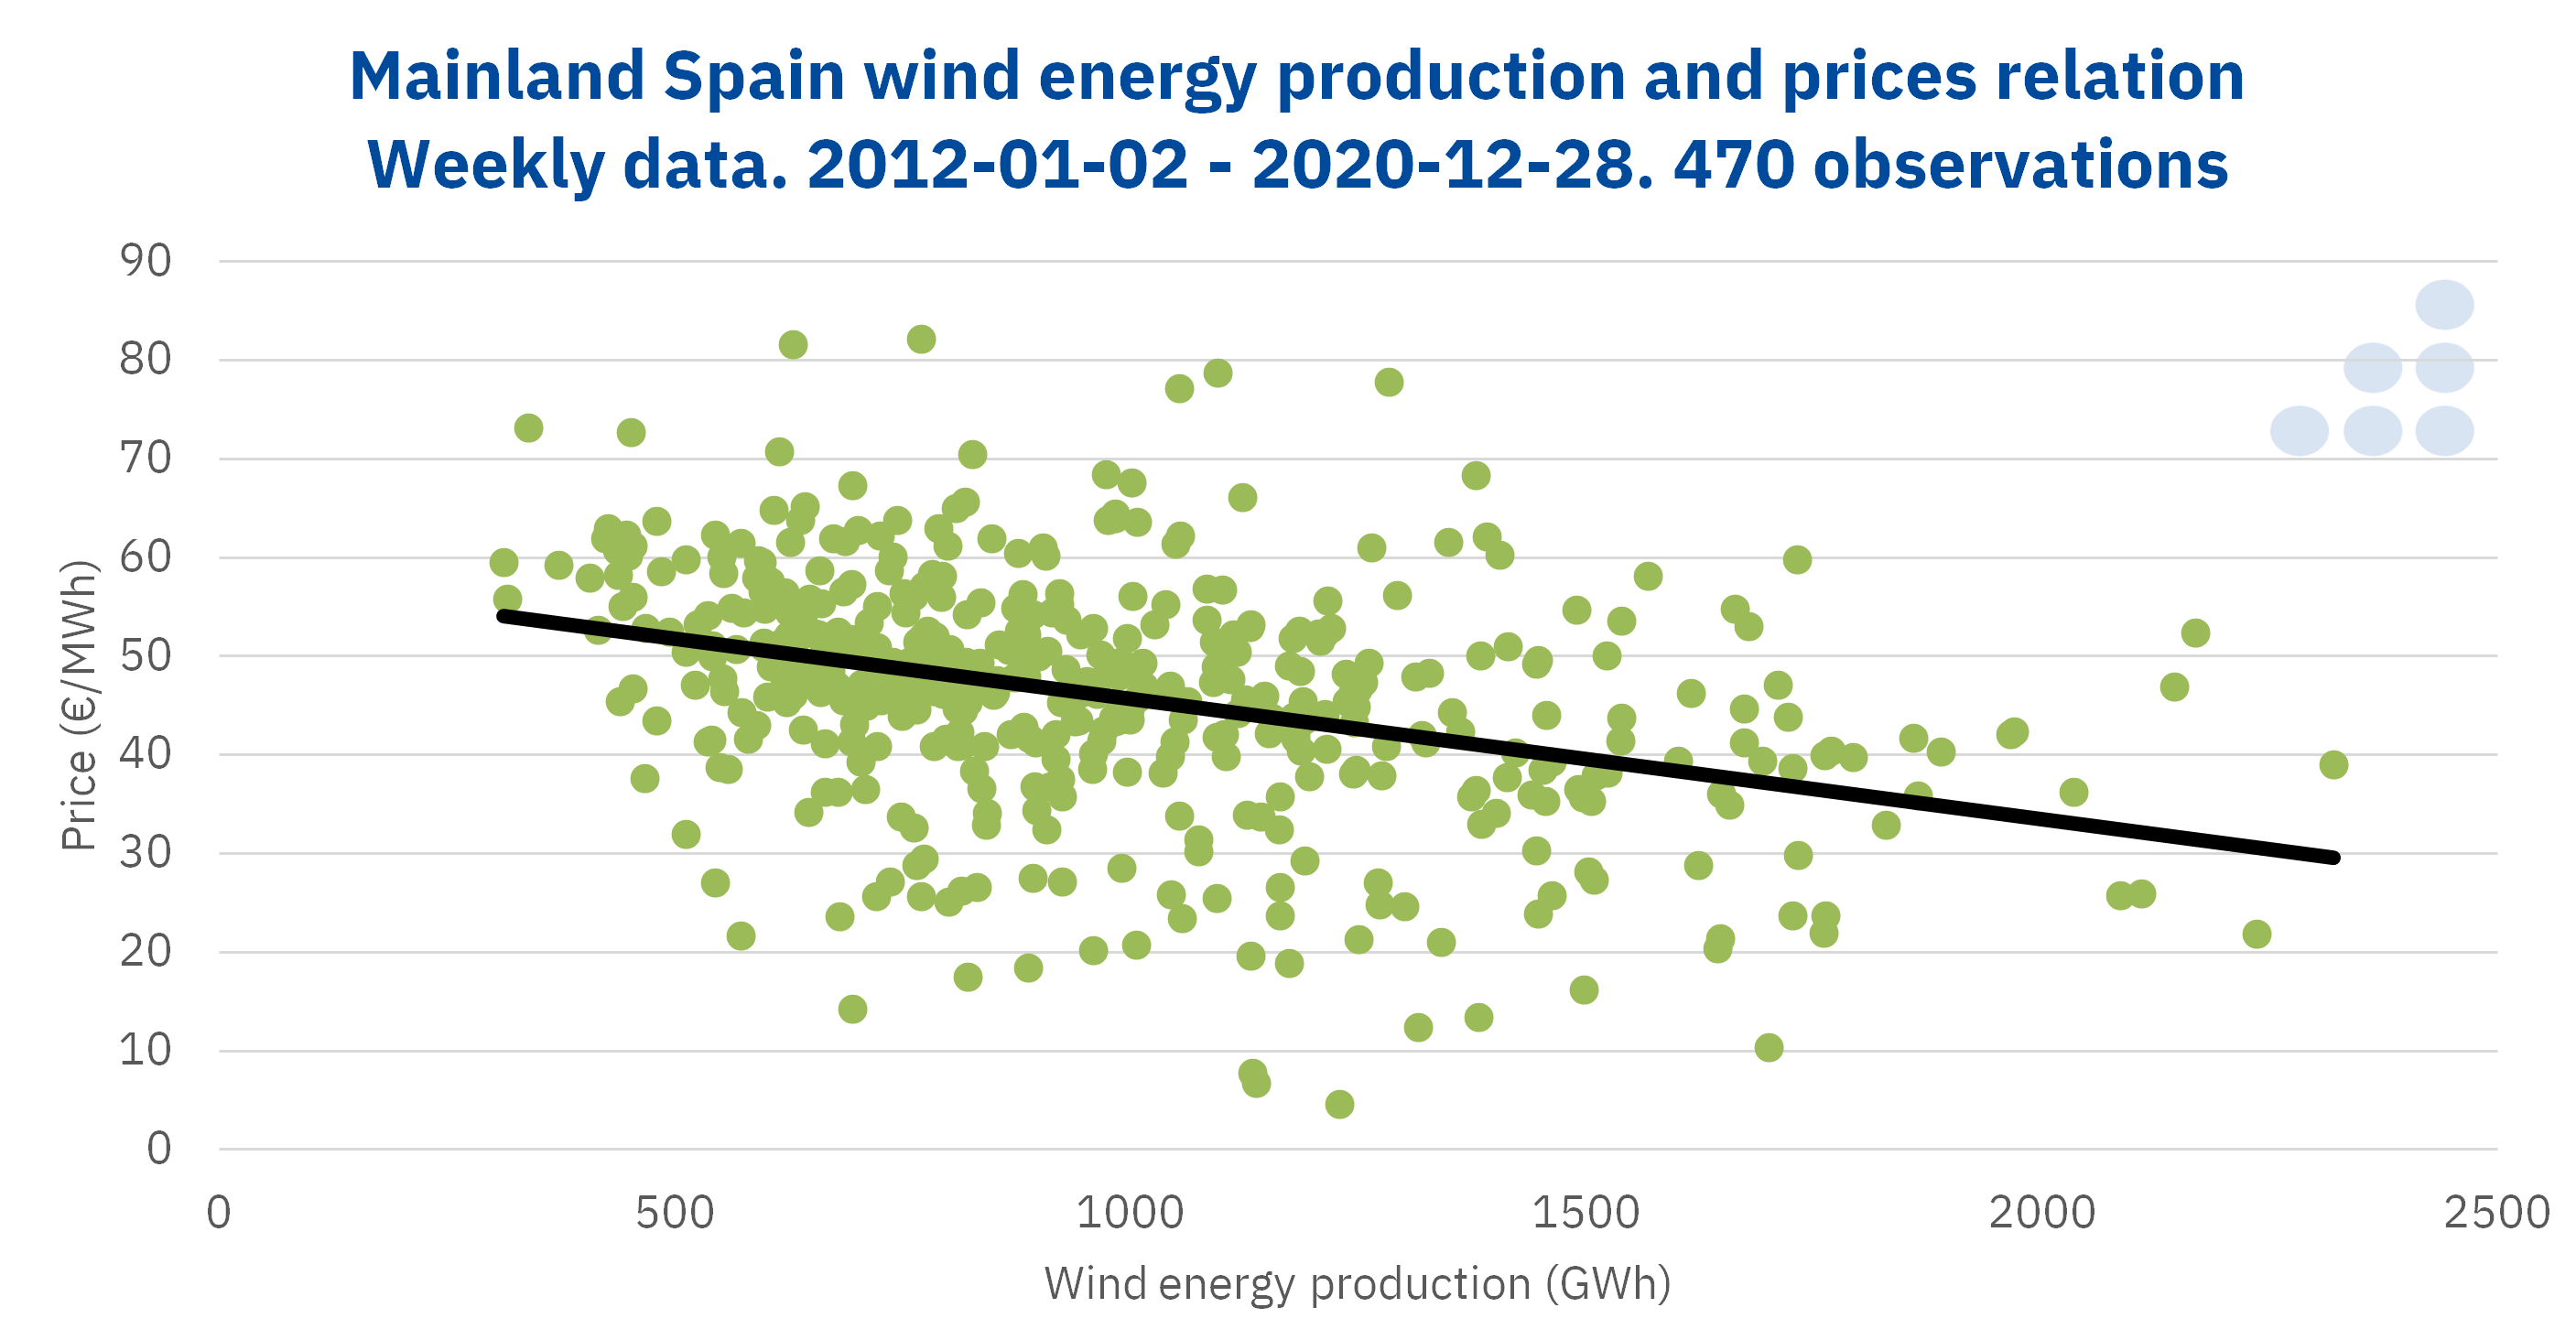 AleaSoft - Mainland spain wind energy production prices relation weekly